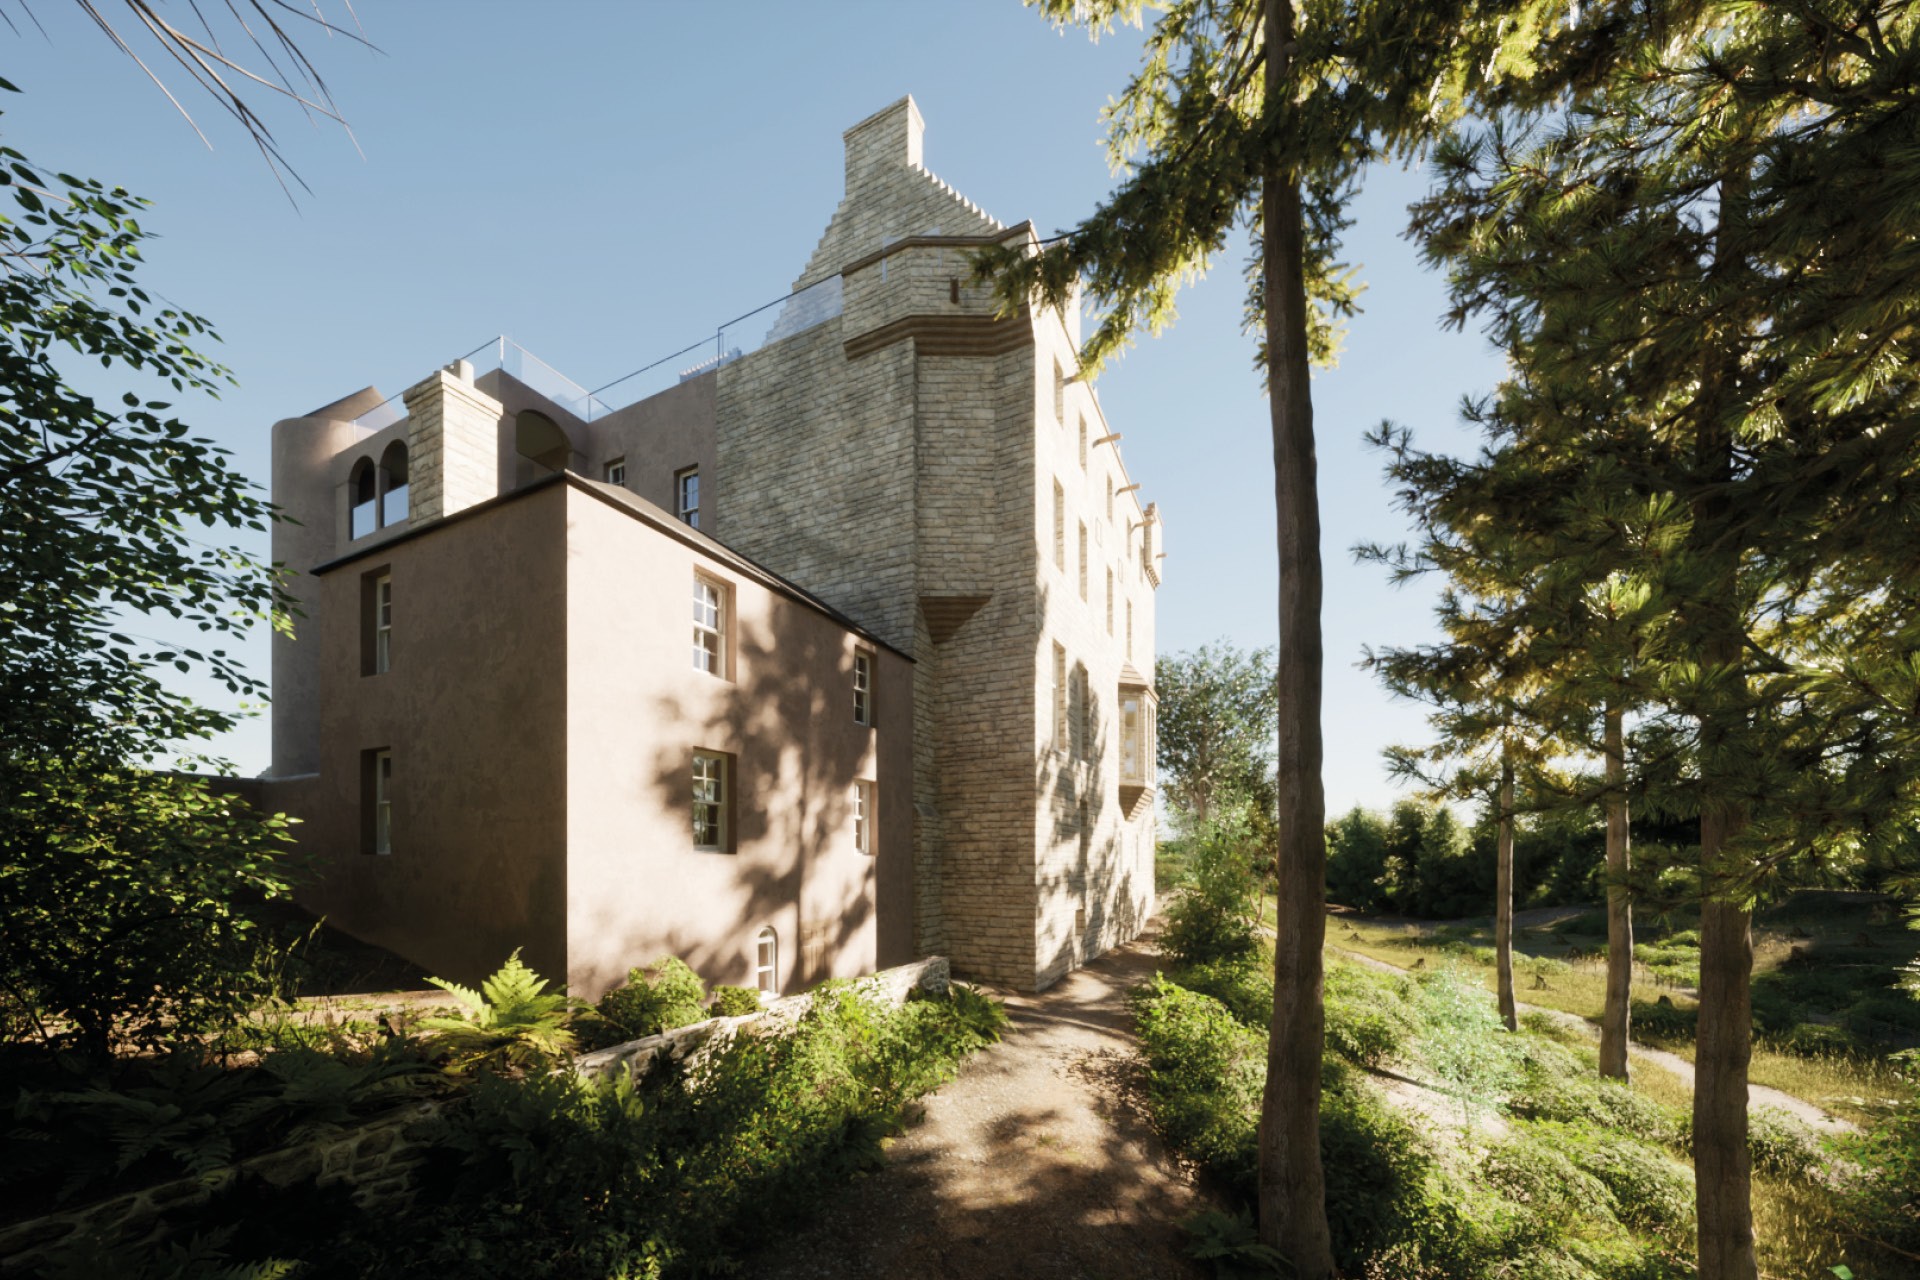 Historic Borders castle to undergo conservation and restoration